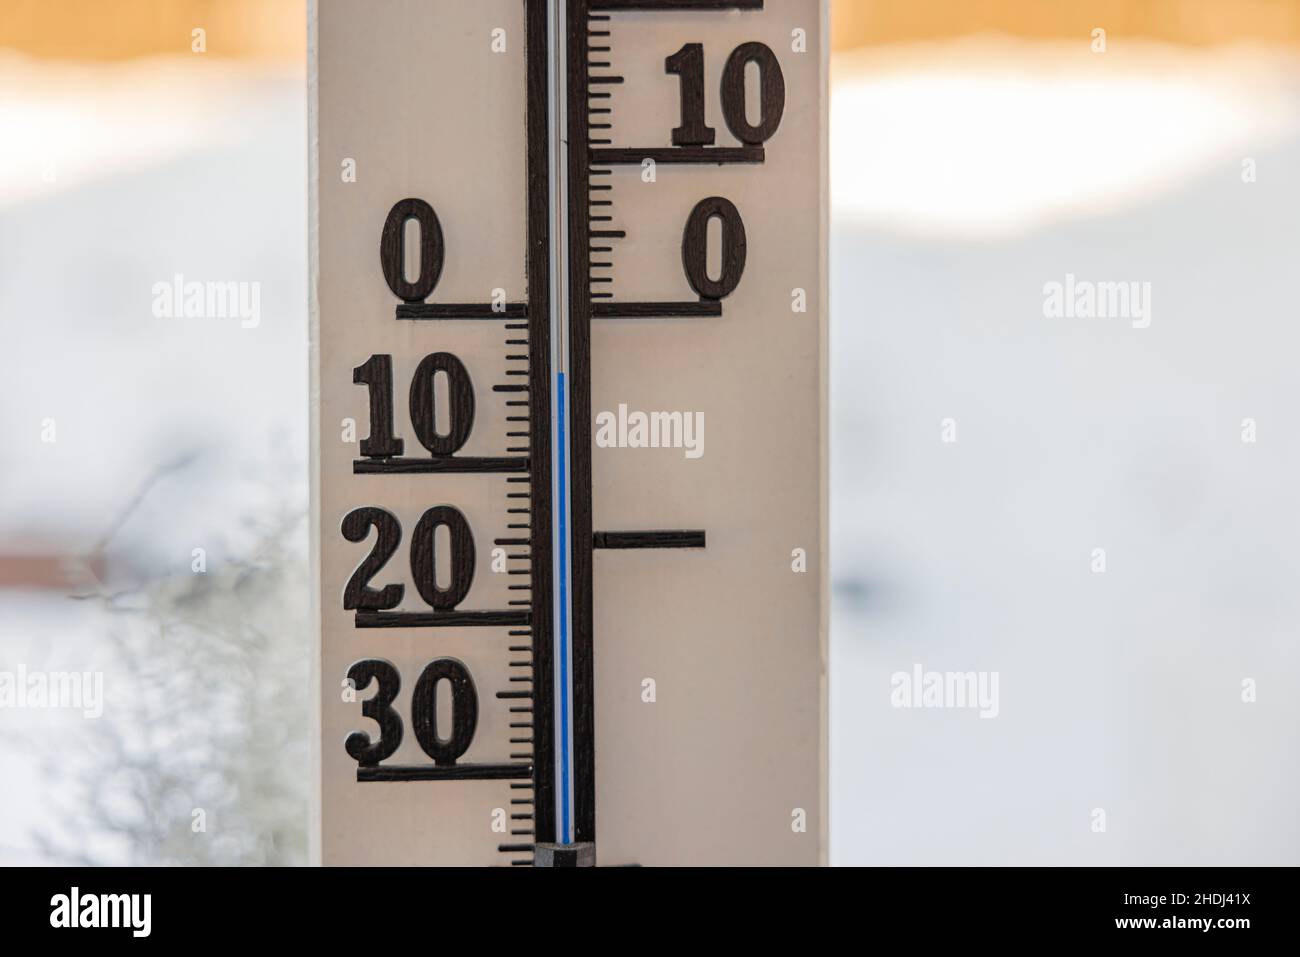 https://c8.alamy.com/comp/2HDJ41X/close-up-view-of-outdoor-thermometer-on-white-wooden-pillar-in-winter-day-sweden-2HDJ41X.jpg